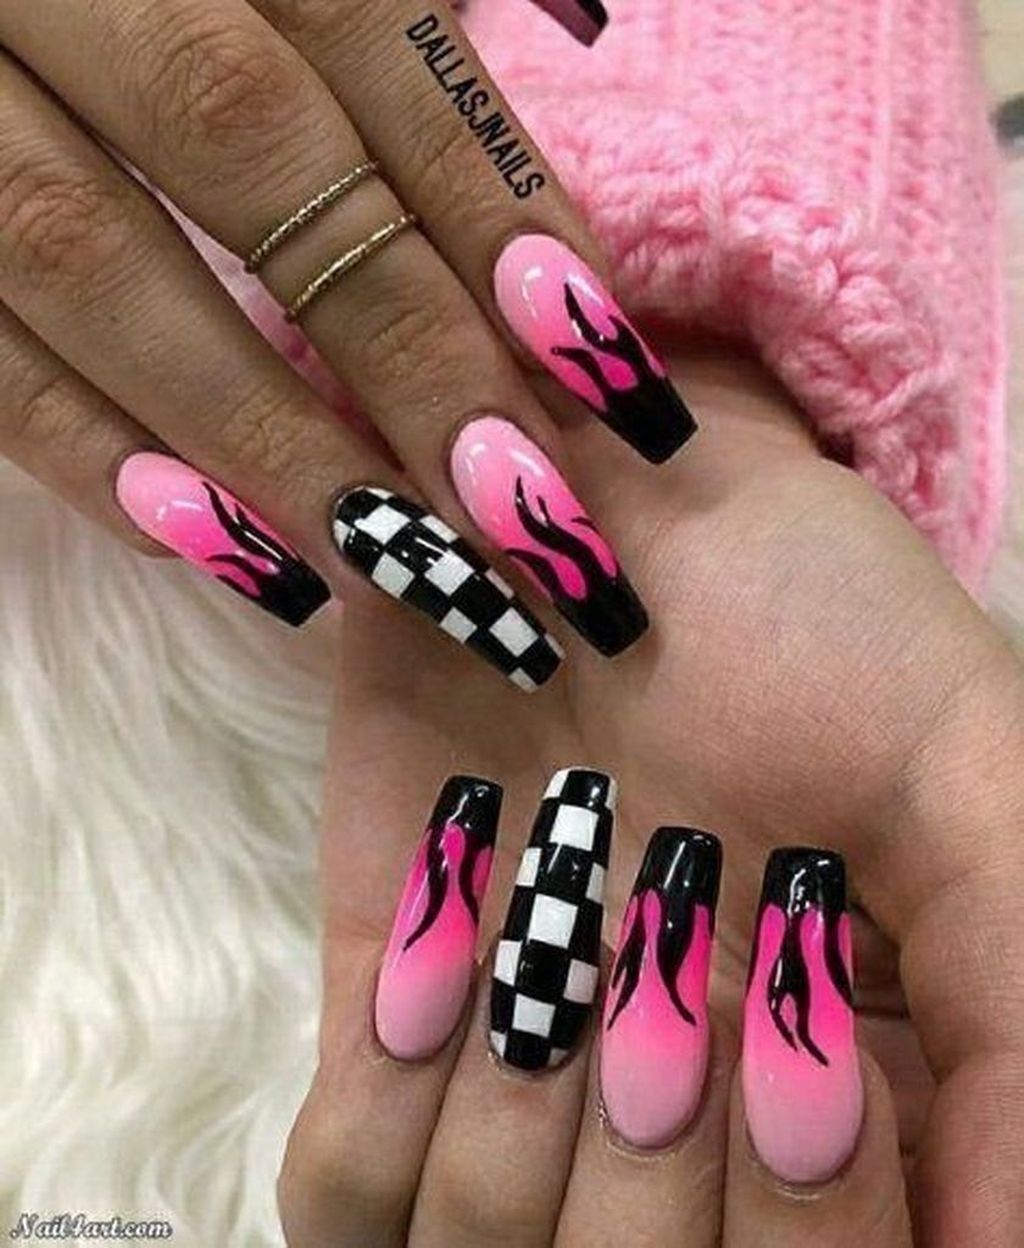 30 Casual Acrylic Nail Art Designs Ideas To Fascinate Your Admirers In 2020 Gelove Nehty Design Nehtu Akrylove Nehty